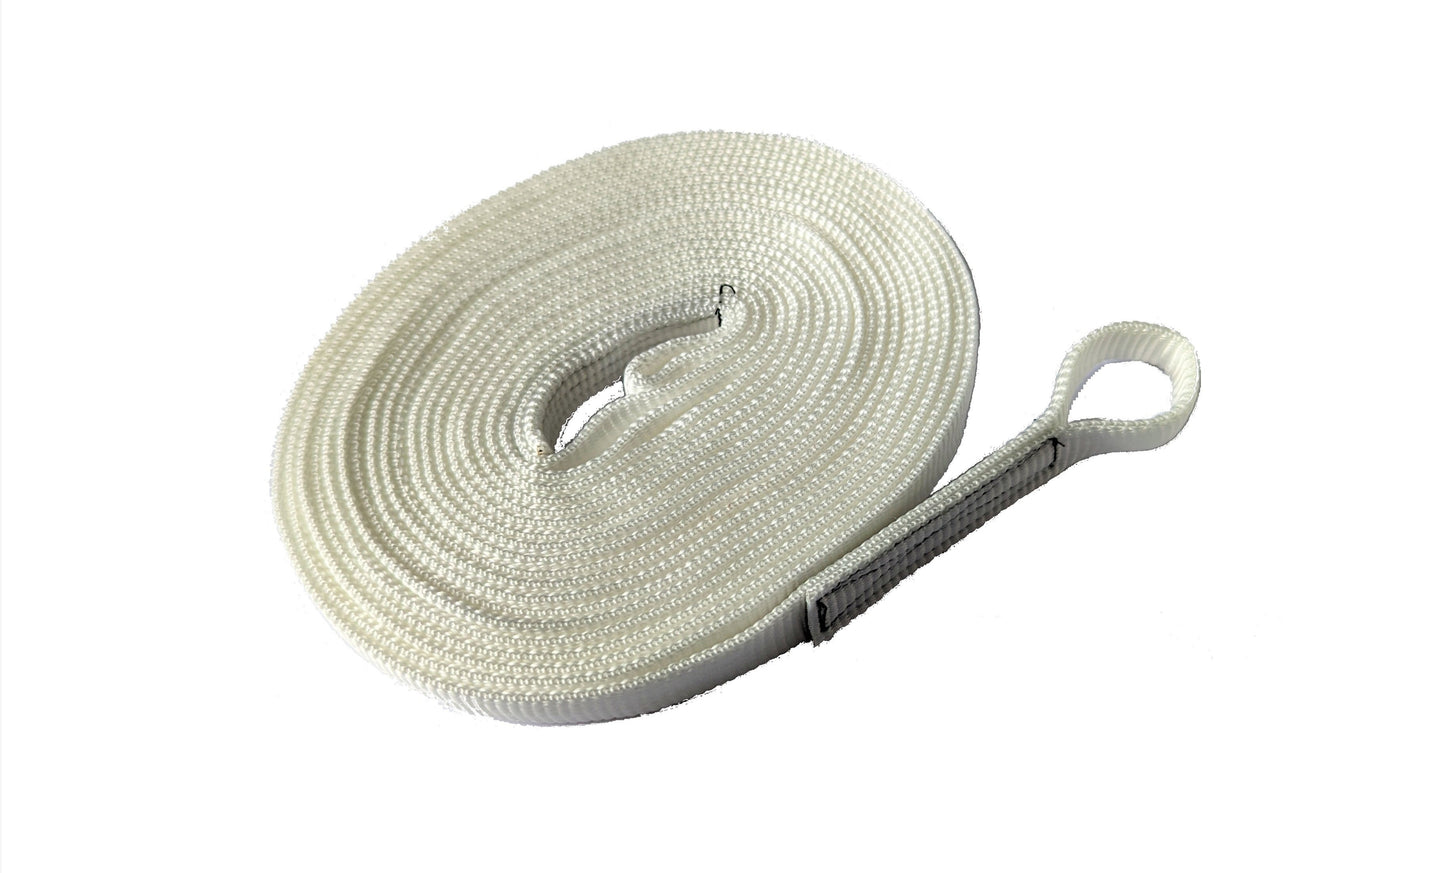 1/2" Tubular Nylon Recovery Harness with Sewn Loops